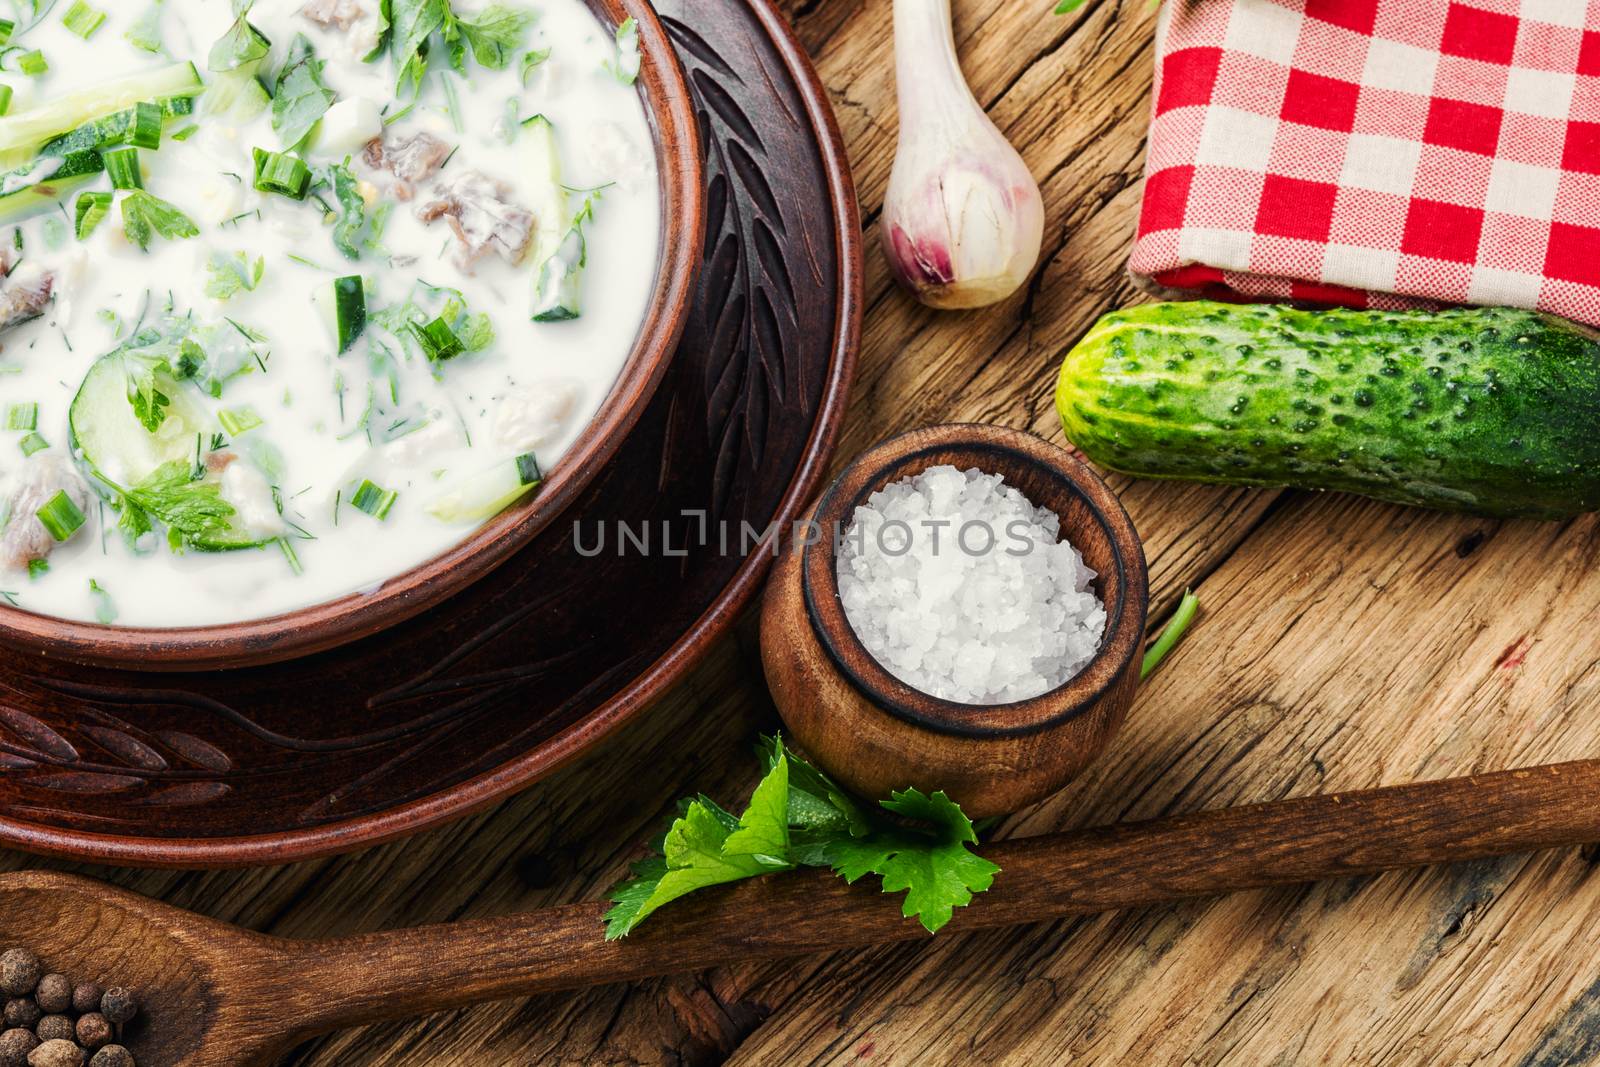 Okroshka is a traditional dish of national Russian cuisine